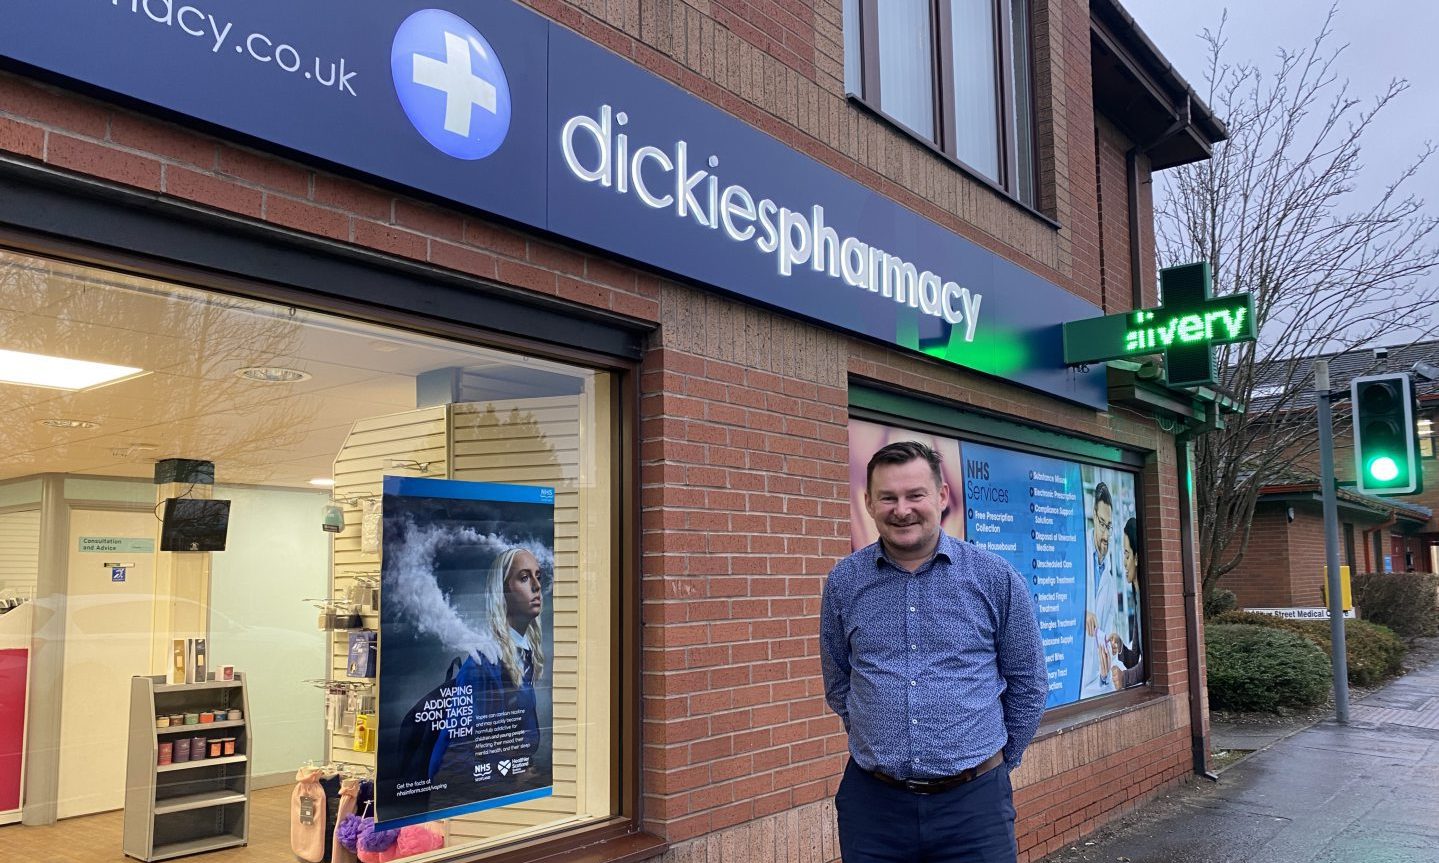 Dickies Pharmacy owner Brian Arris at the branch in Glover Street, Perth. Image: Kaya MacLeod/DC Thomson